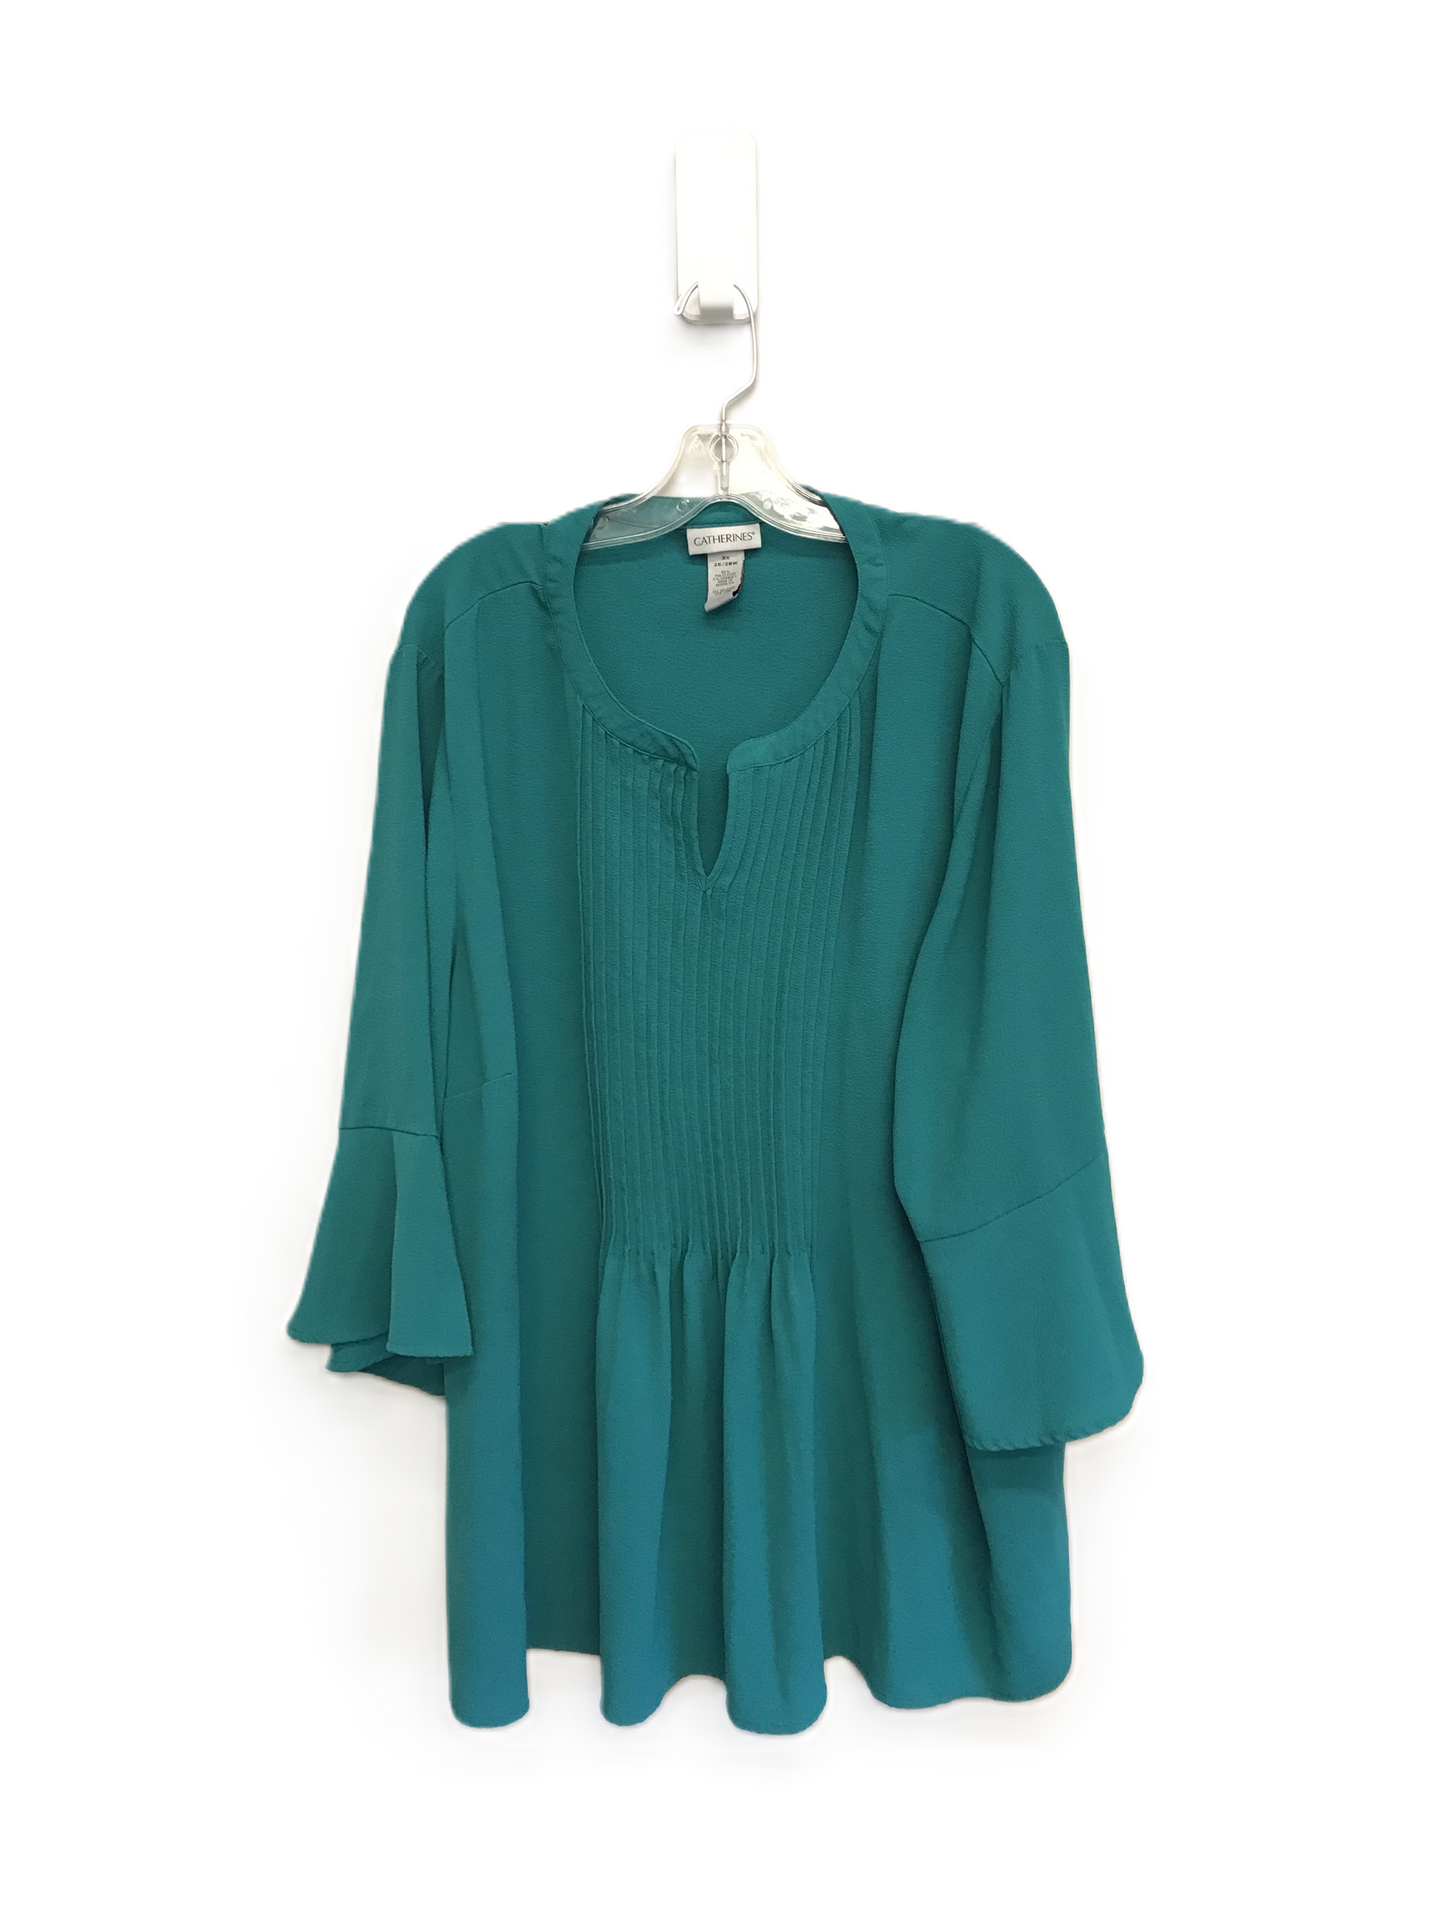 Teal Top Long Sleeve By Catherines, Size: 3x